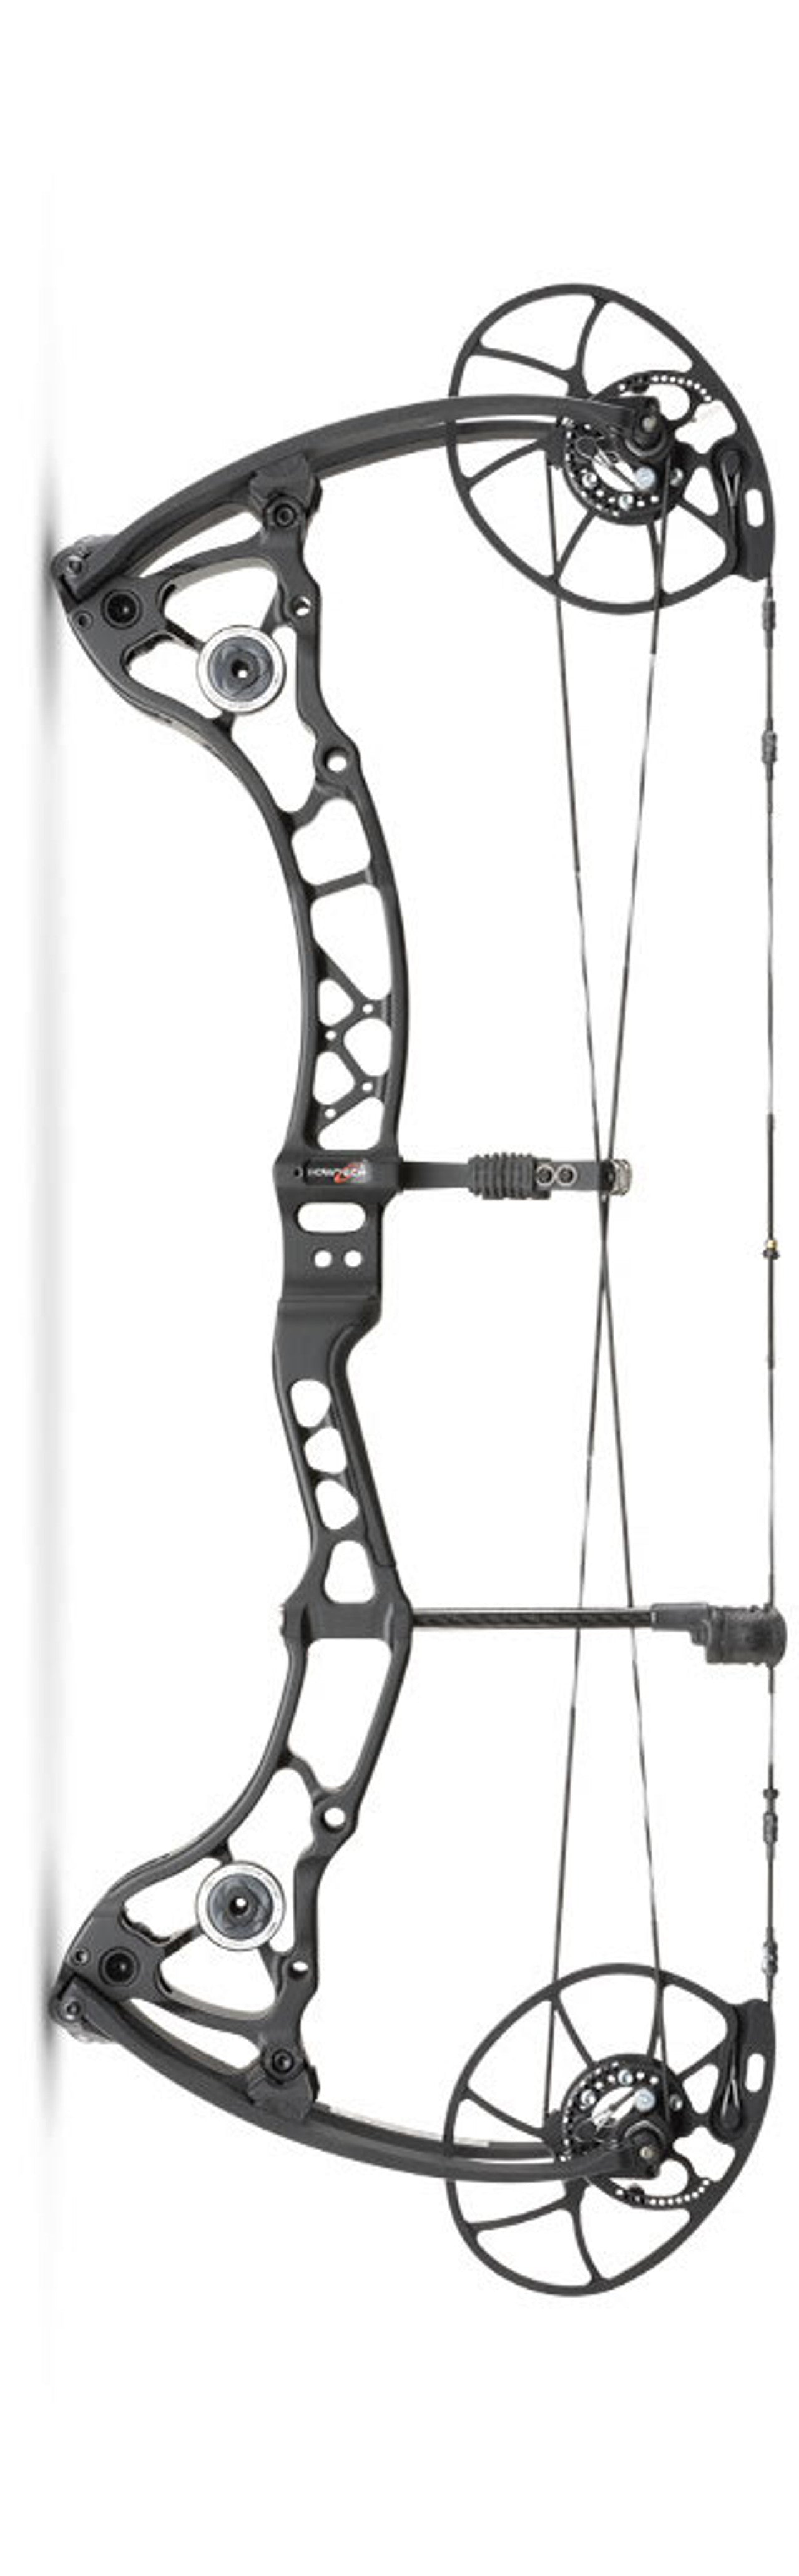 Bowtech CP28 Compound Bow | Whisper Quiet and Vibration Free